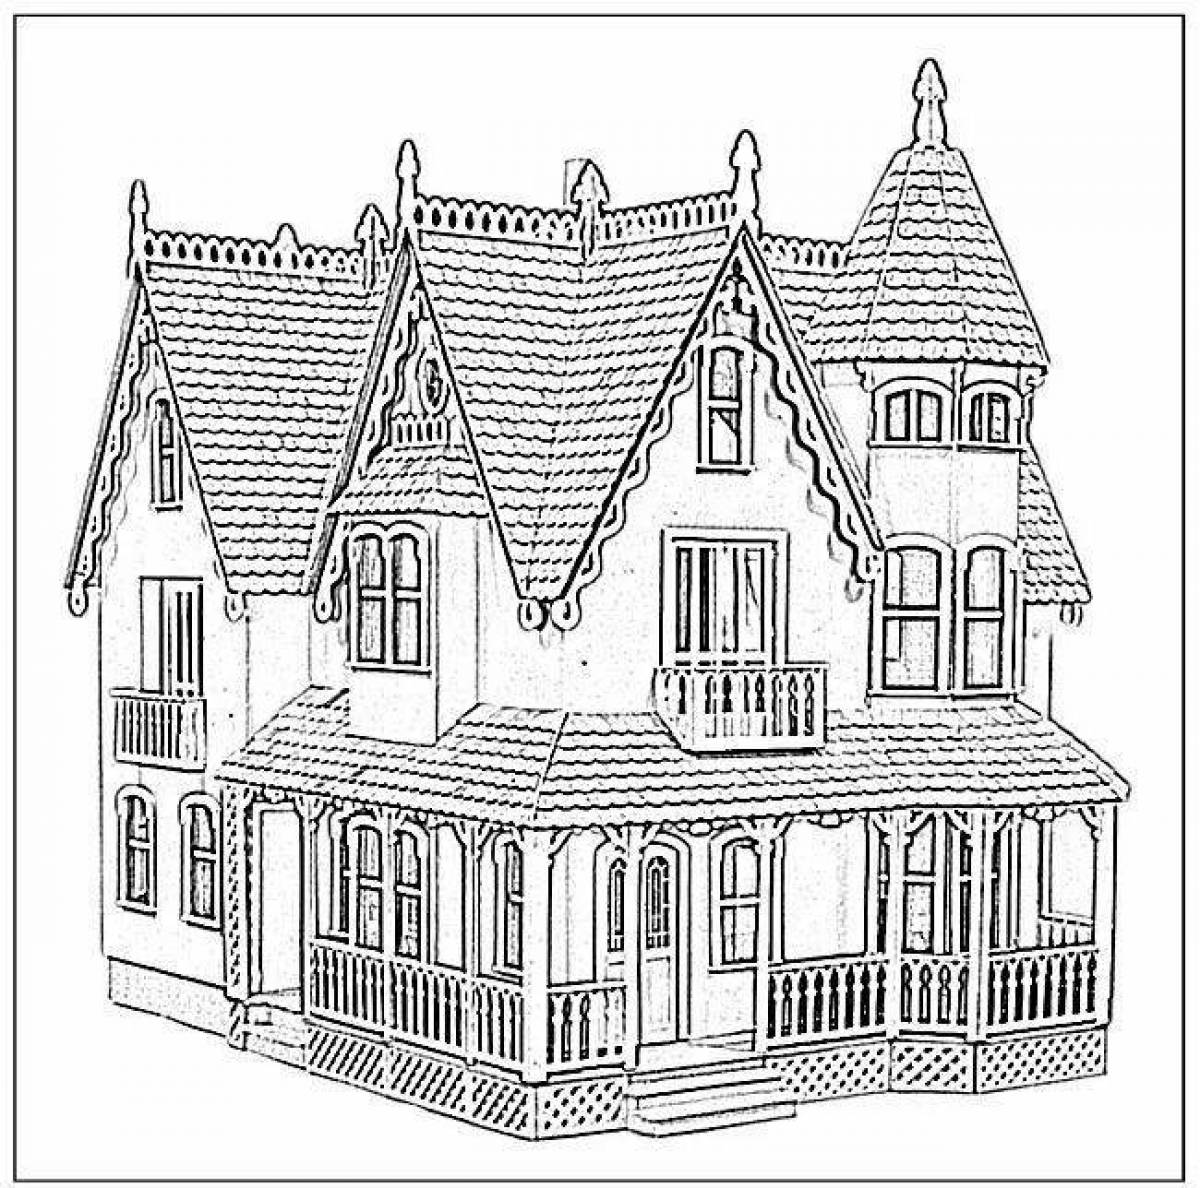 Fabulous two-story house coloring page